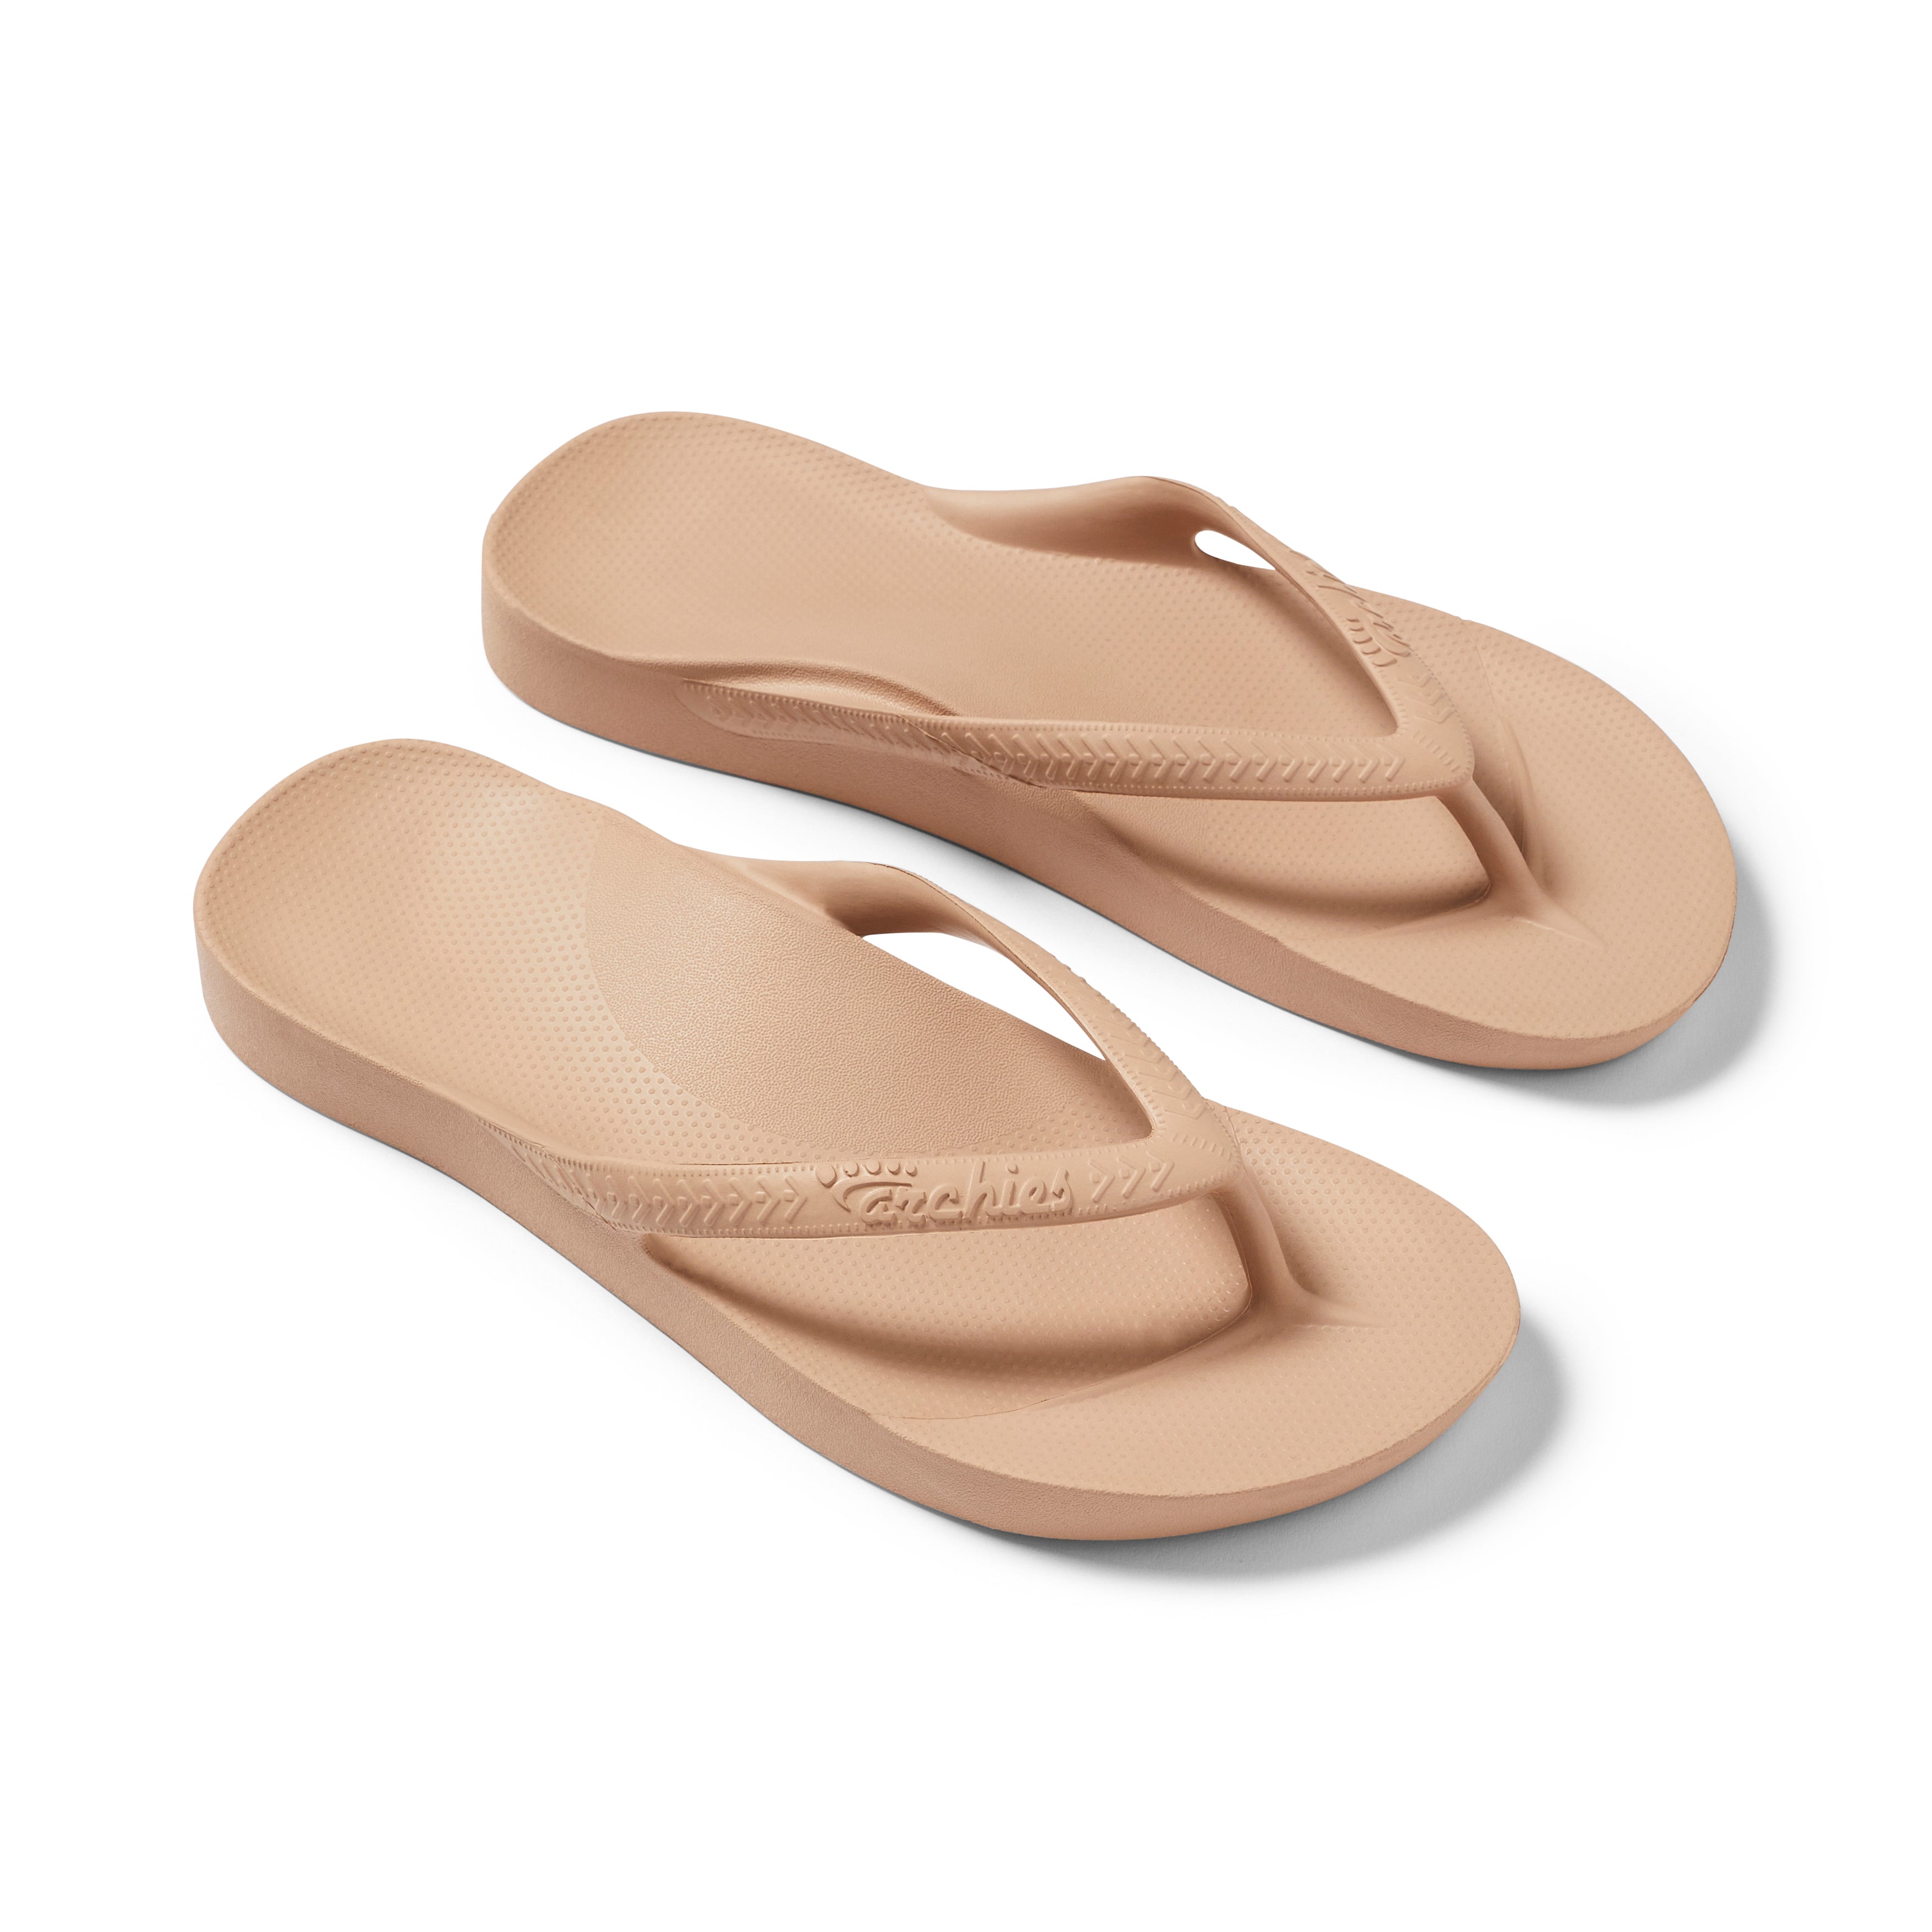 Arch Support Flip Flops - Classic - Coral – Archies Footwear LLC